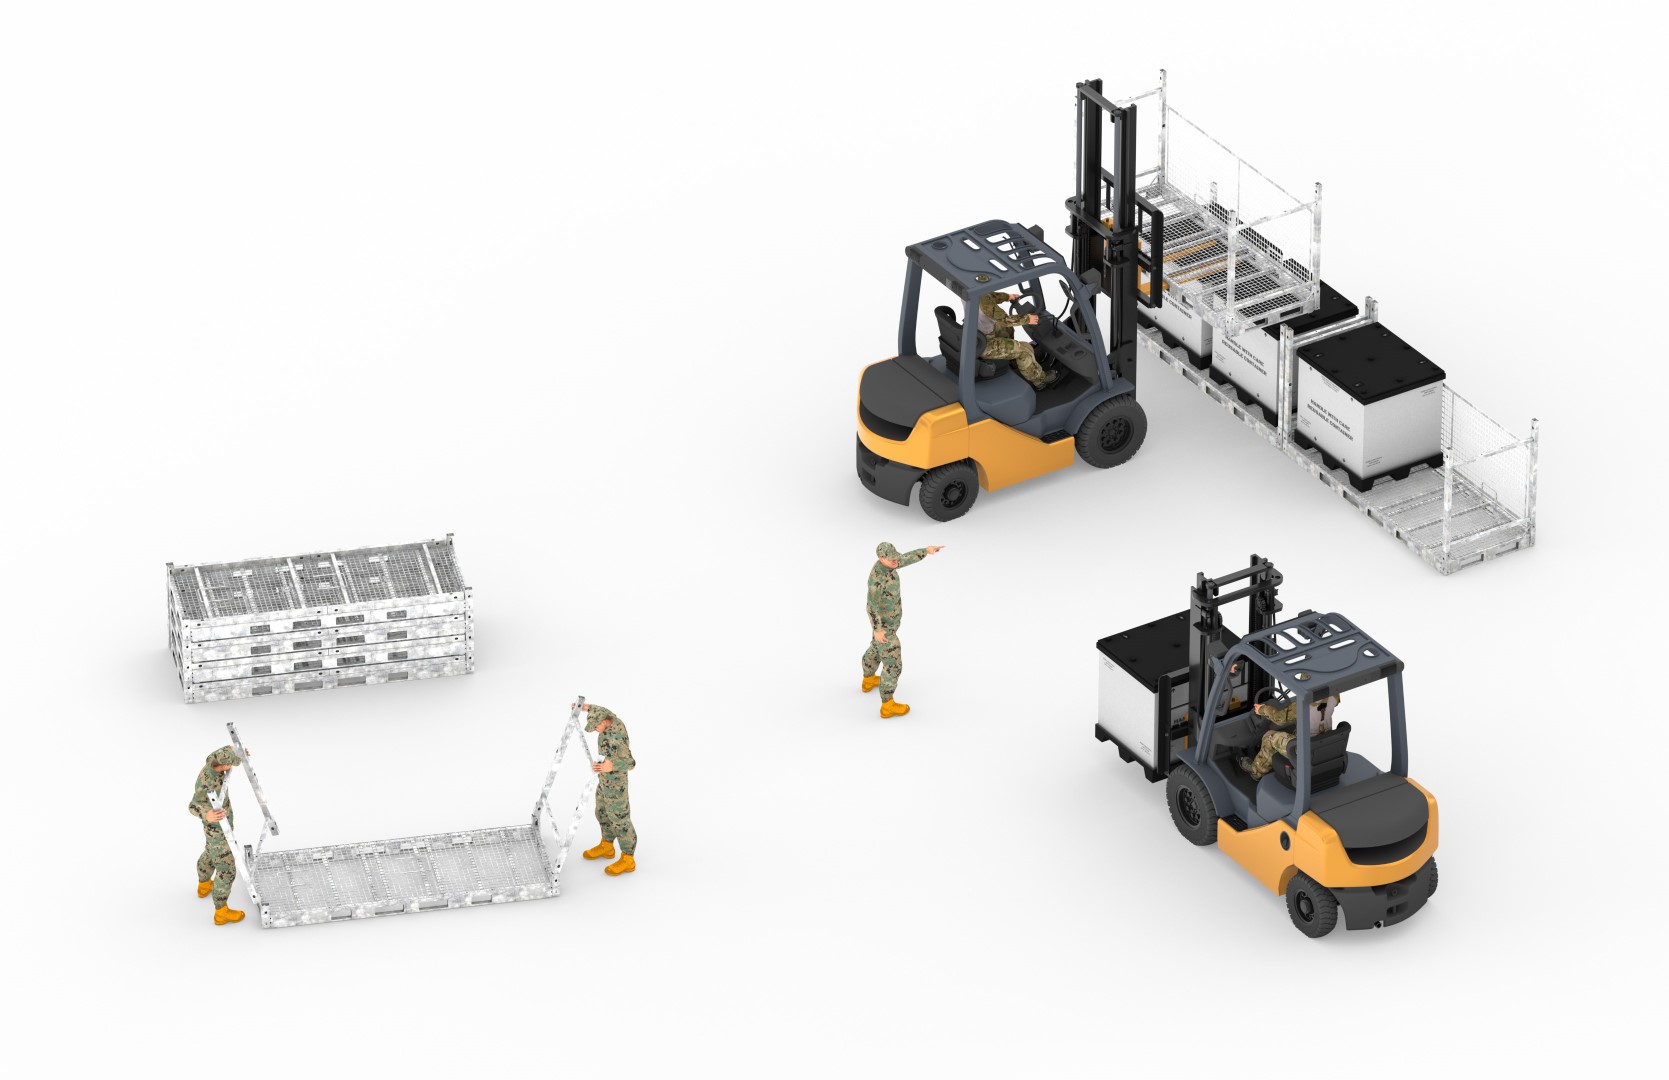 Two people assemble stack-racks while forklift drives assembled unit for stacking